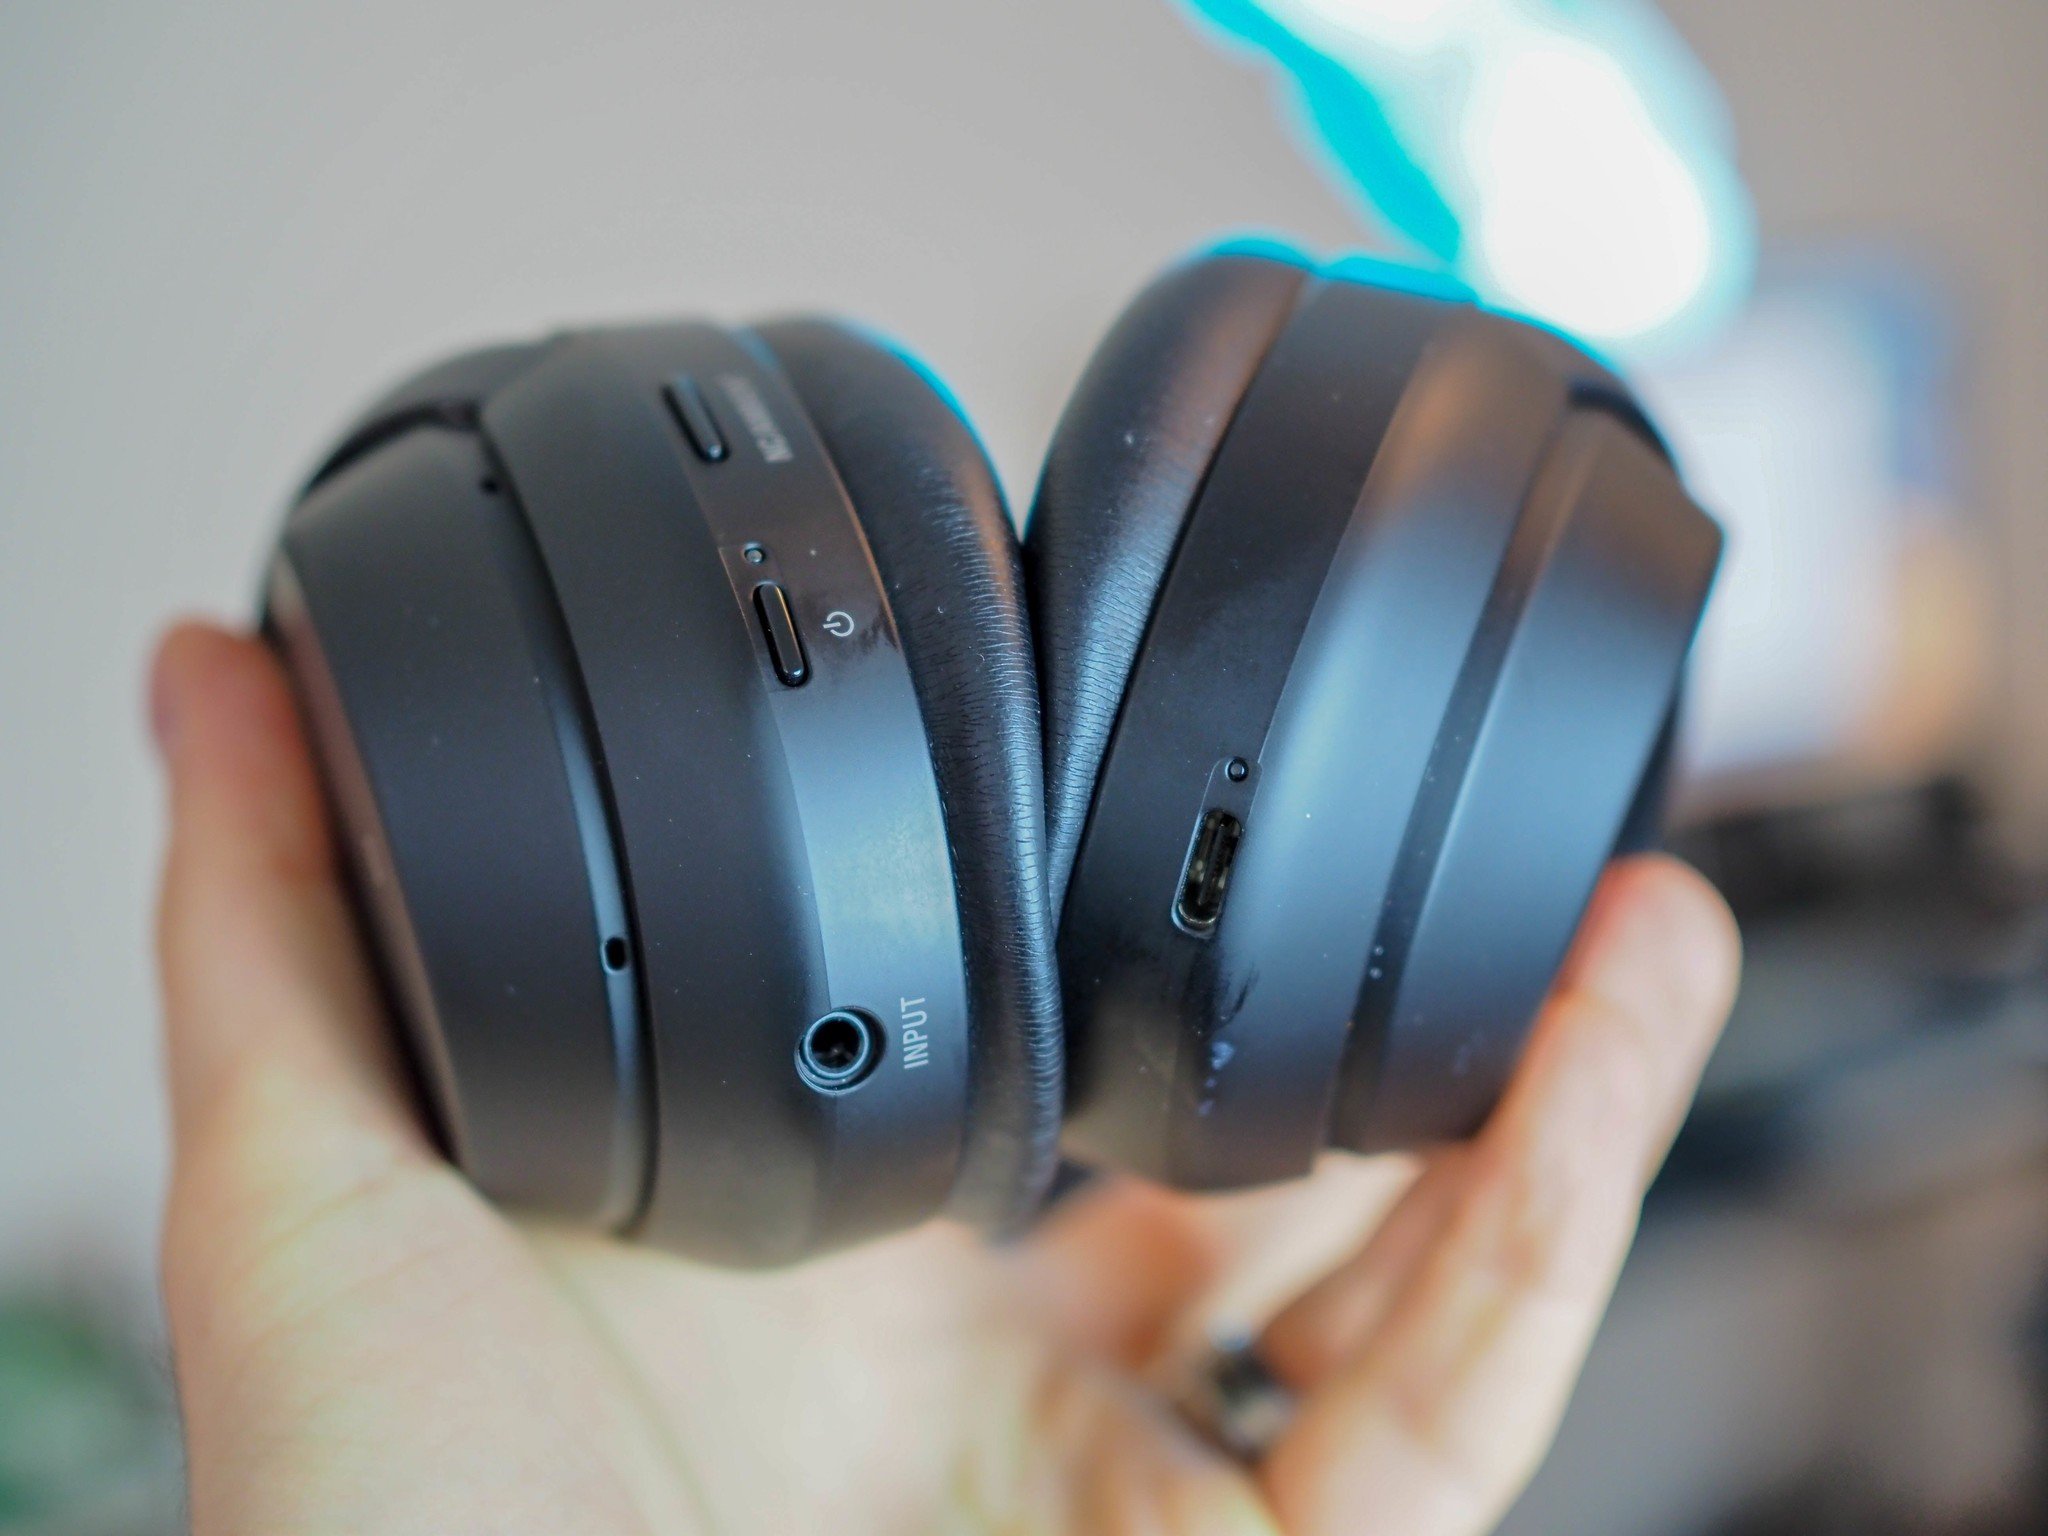 Sony WH-1000XM4 Vs. WH-1000XM3: Which one should you buy